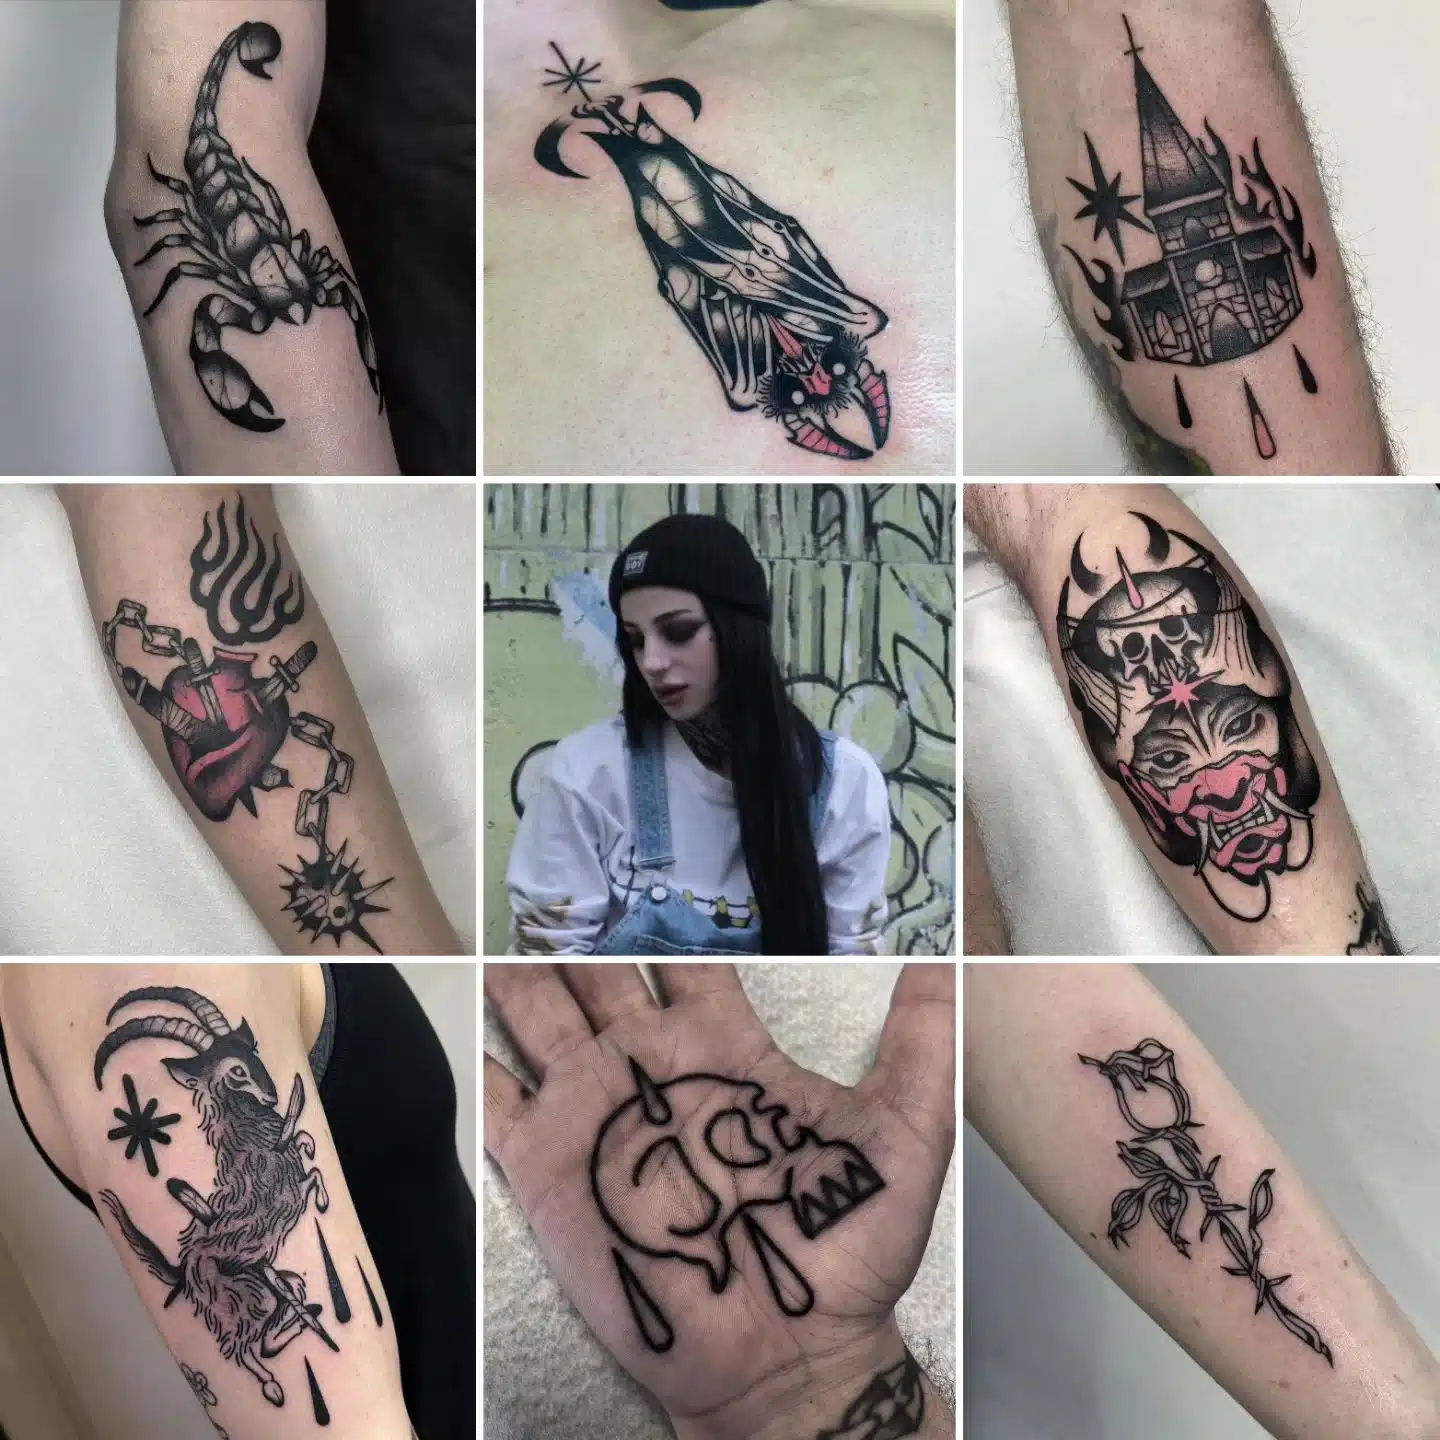 Upcoming guest spot: our returning guest Angie bleckmun ! Angie will be here 13th to 16th November.
Spaces are filling up fast as we've had a lot of enquiries over the weekend, we anticipate she will be fully booked by the end of the week. Looking forward to having you back!

      